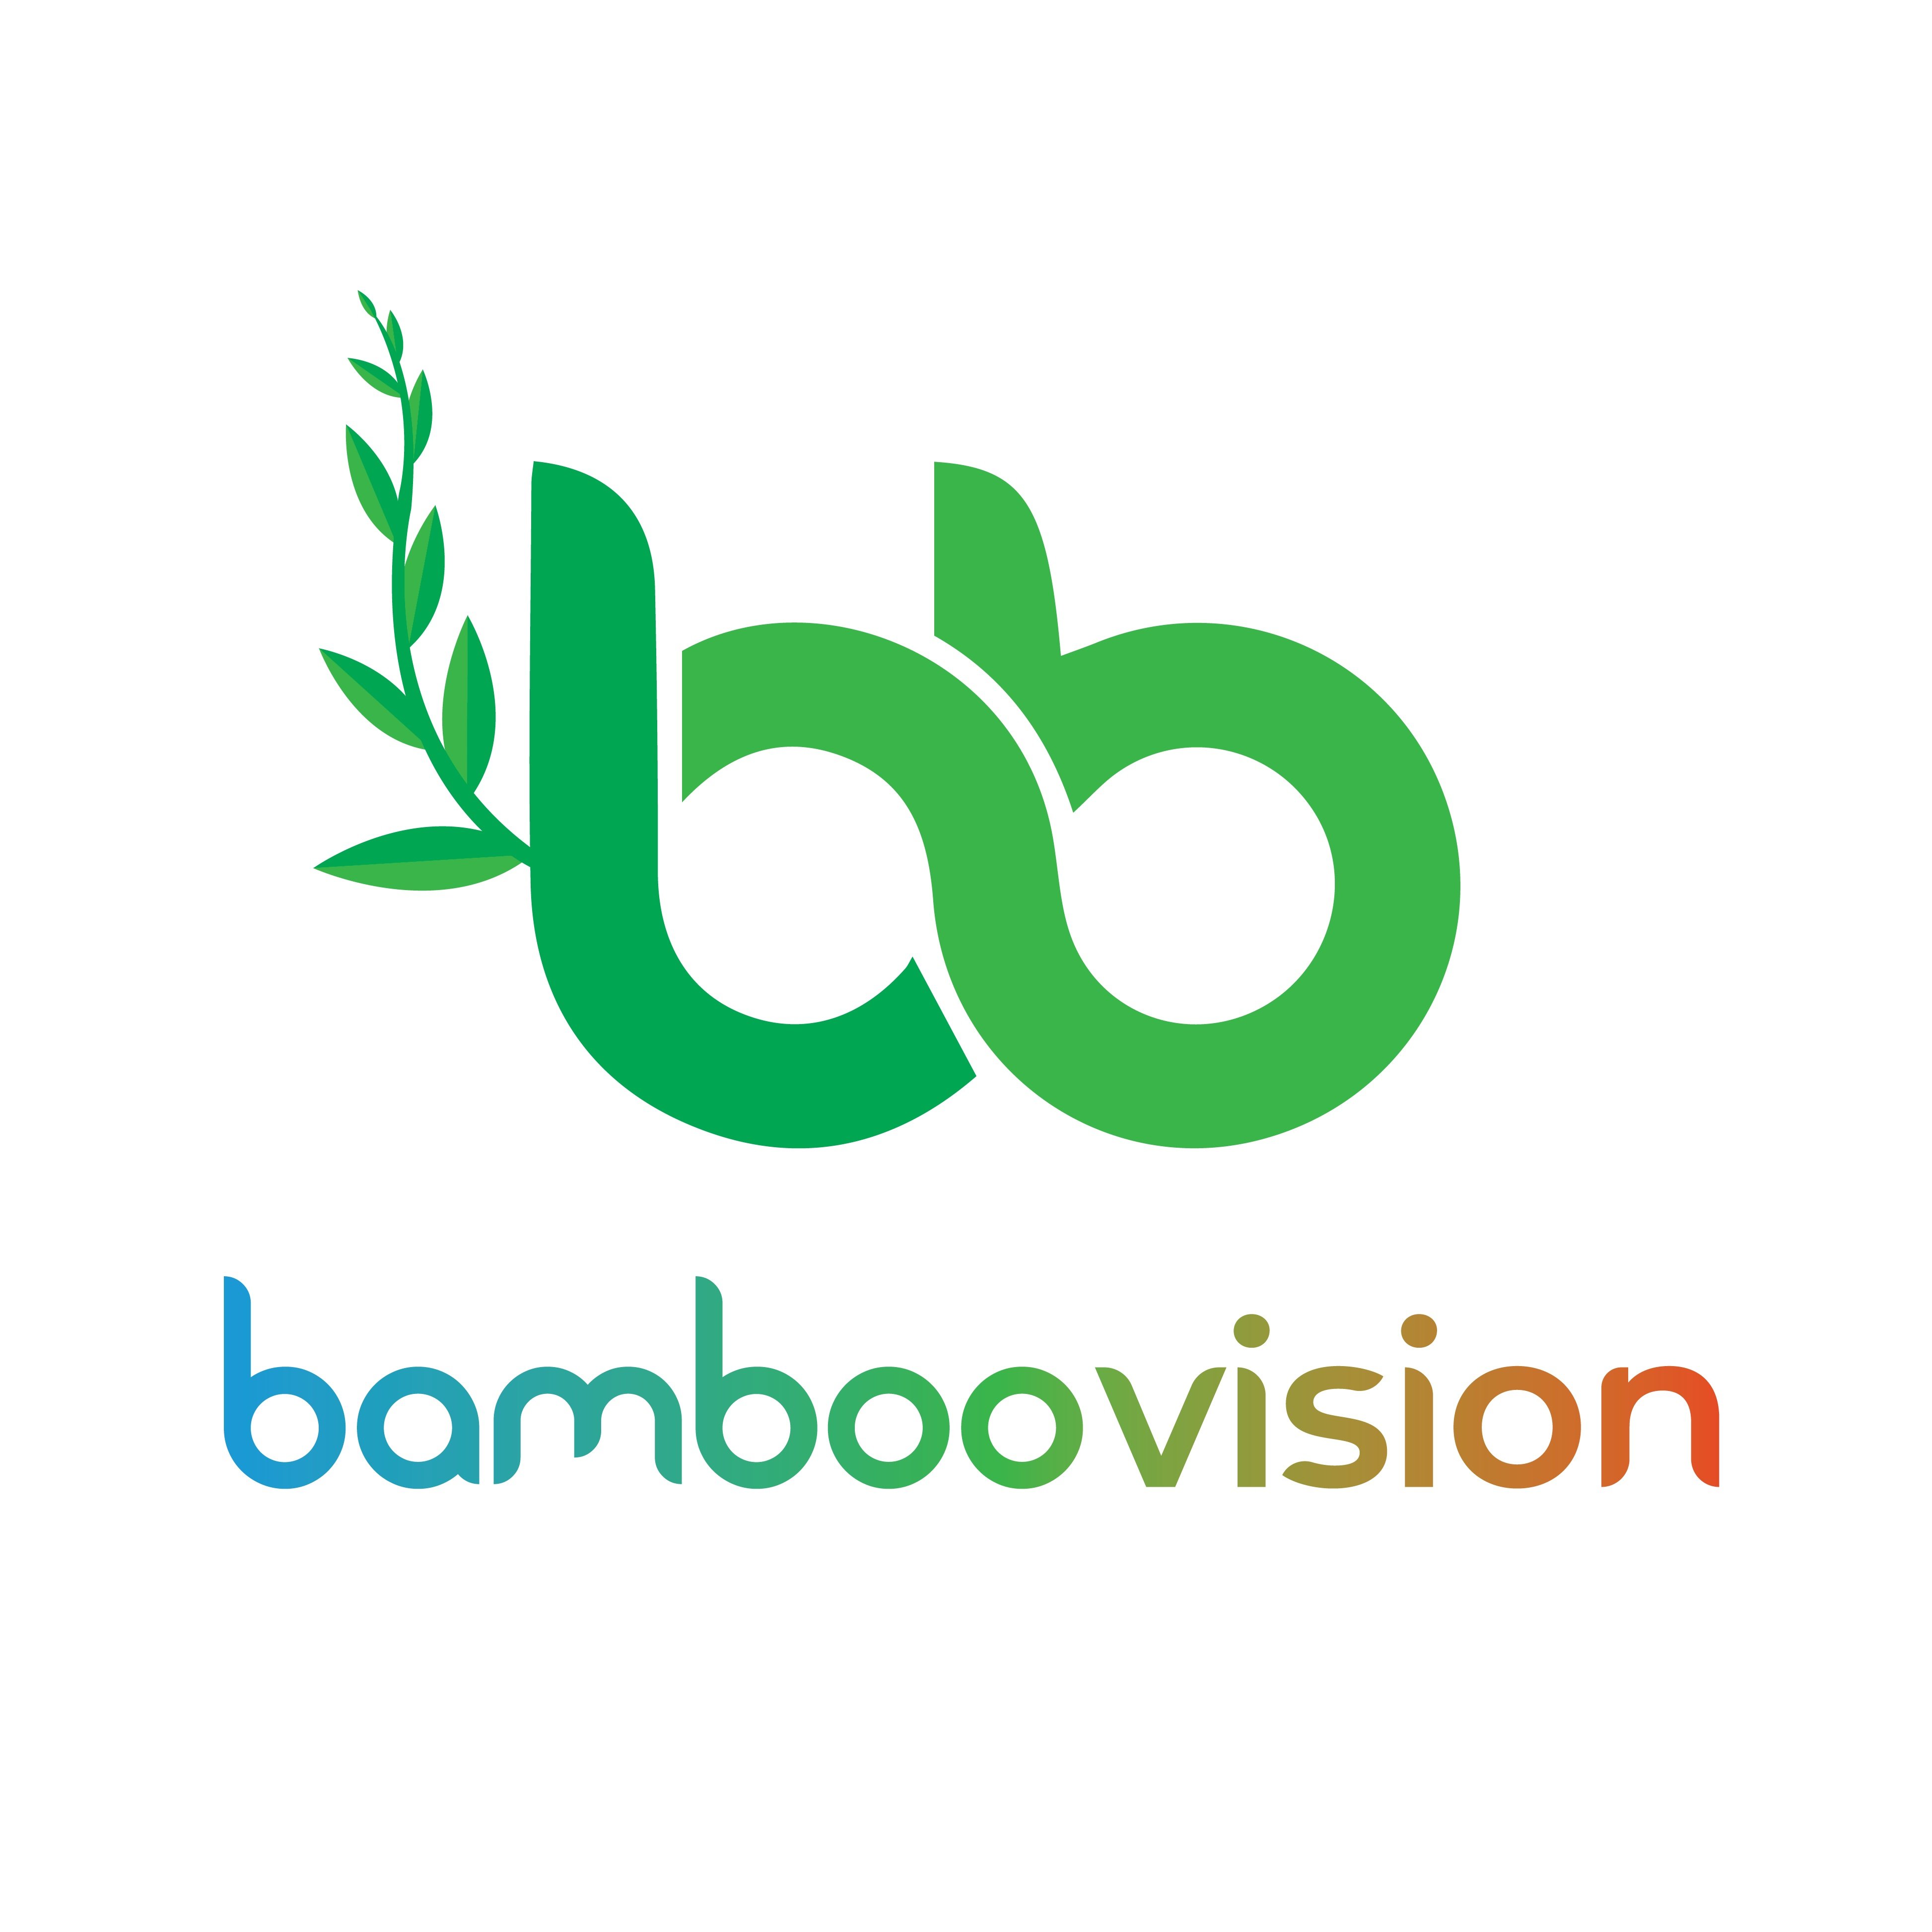 Bamboo Vision is dedicated to creating a sustainable network of bamboo farms with the goal of replacing non-biodegradable materials.